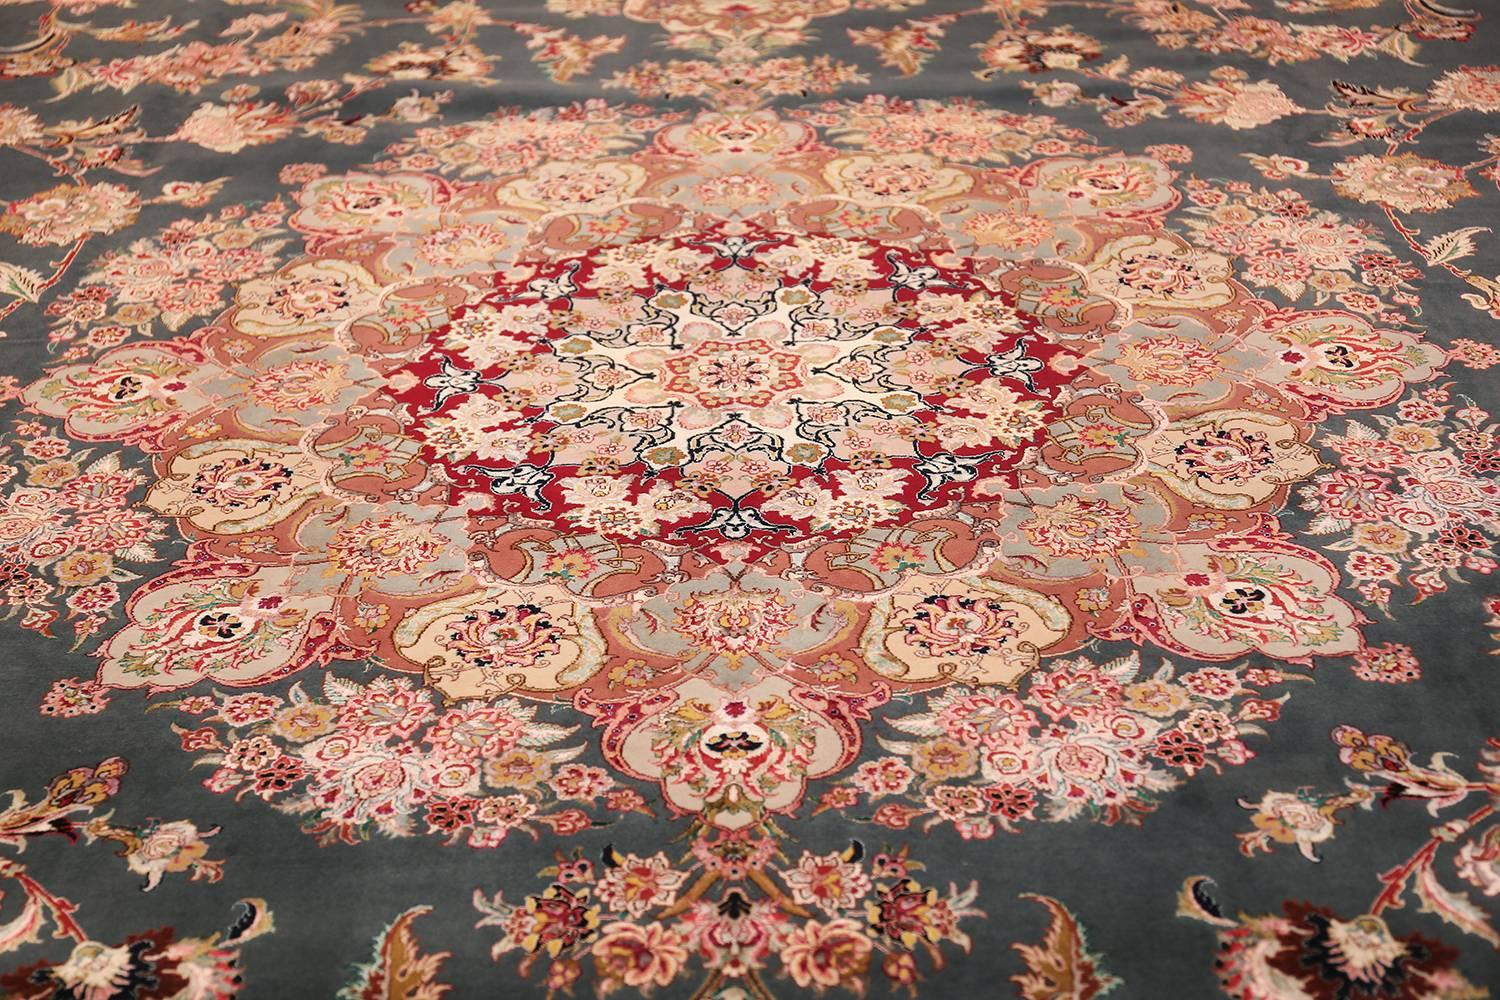 Magnificent large fine vintage Tabriz Persian rug, country of origin / rug type: Vintage Persian rug, circa late 20th century. Size: 11 ft 6 in x 17 ft 1 in (3.51 m x 5.21 m)

